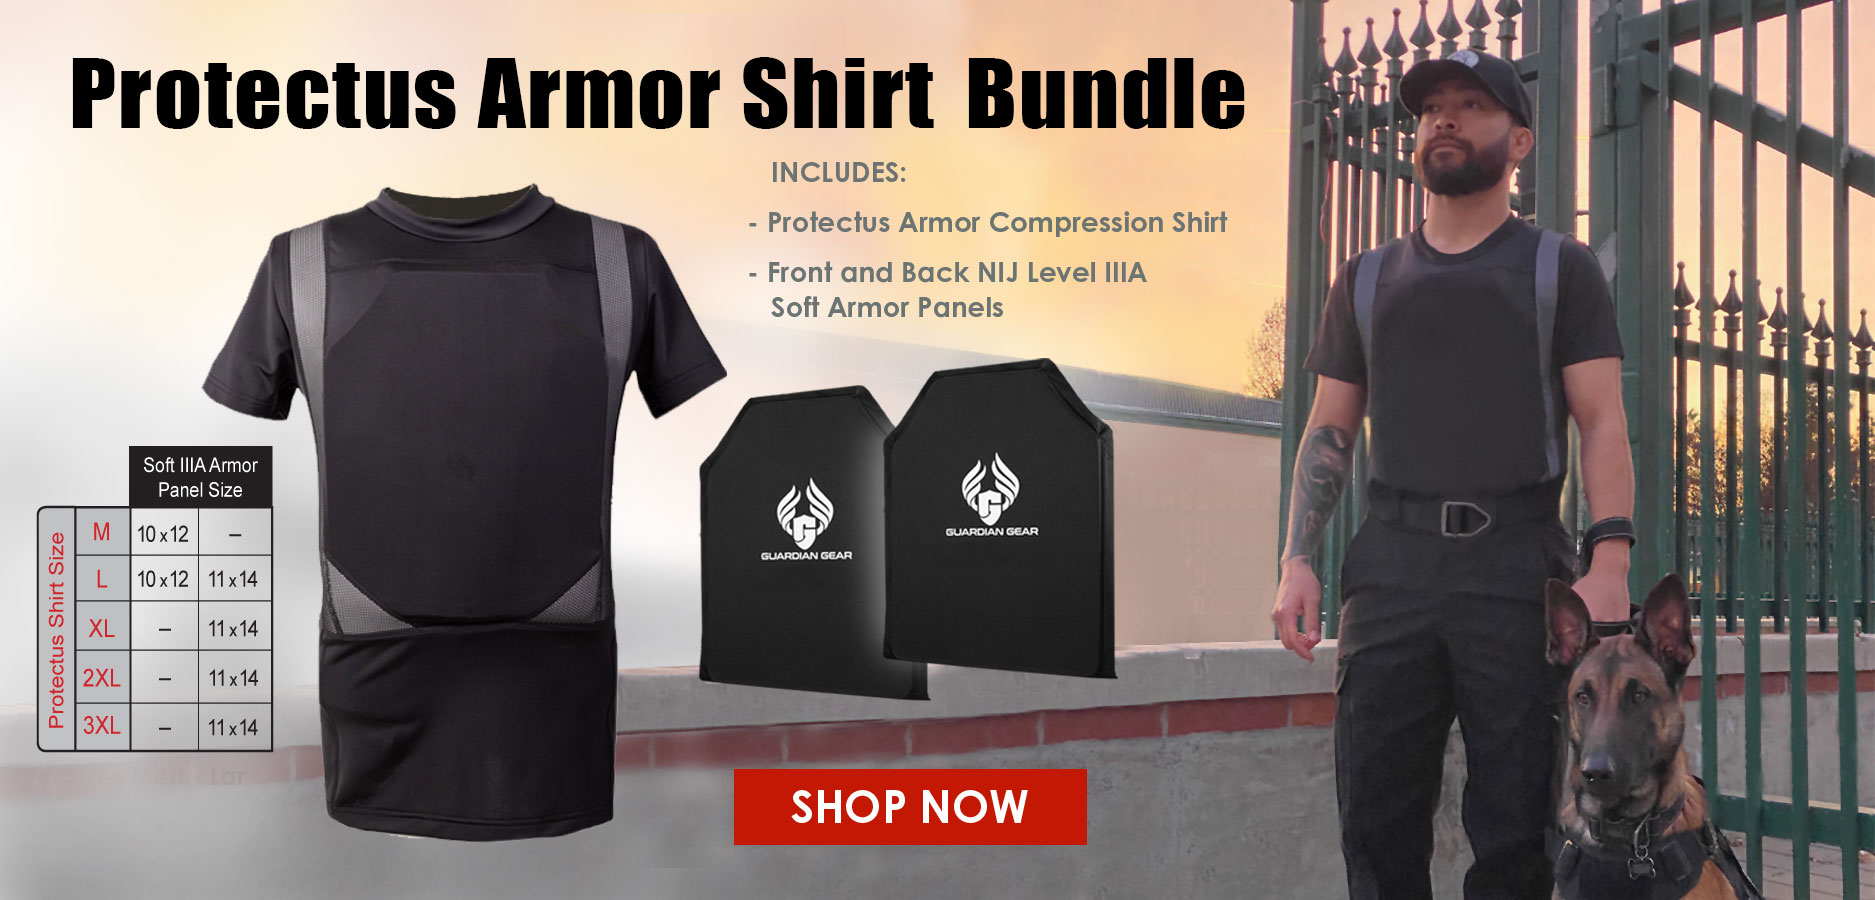 Level III Body Armor - Rifle Rated Protection - Premier Body Armor